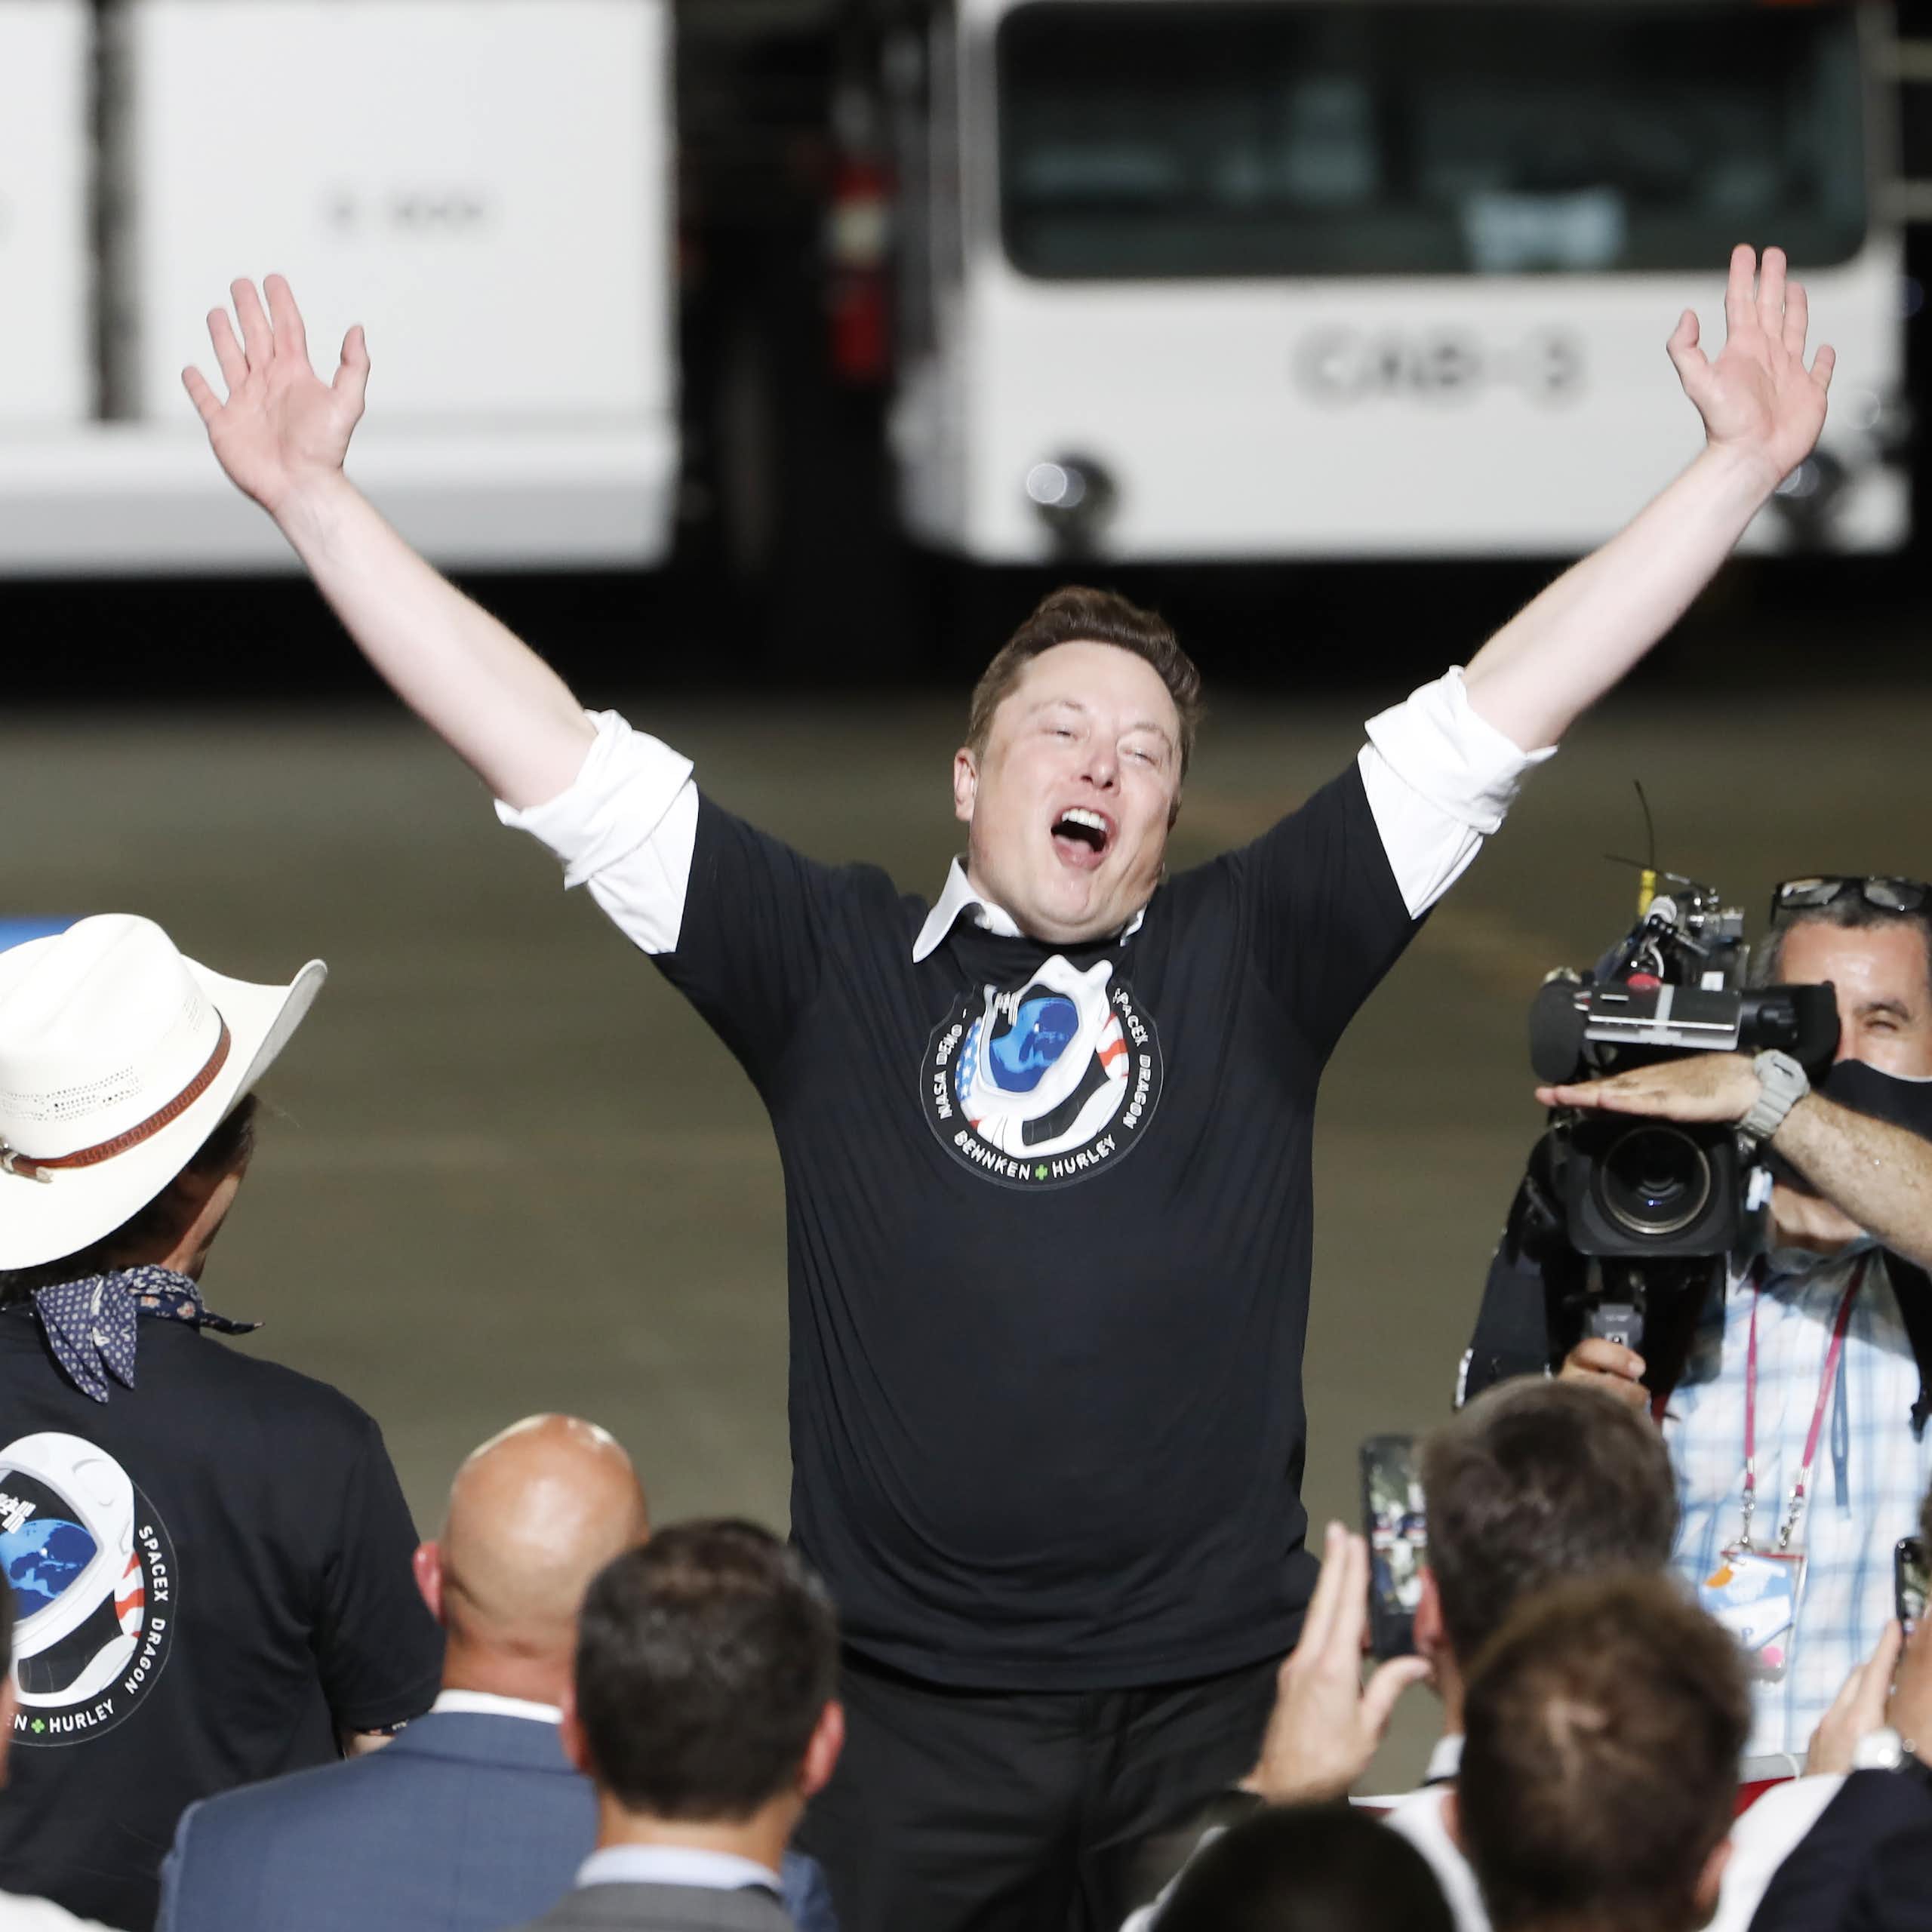 Elon Musk celebrates as SpaceX Crew Dragon Demo2 manned space mission launches from Kennedy Space Center.